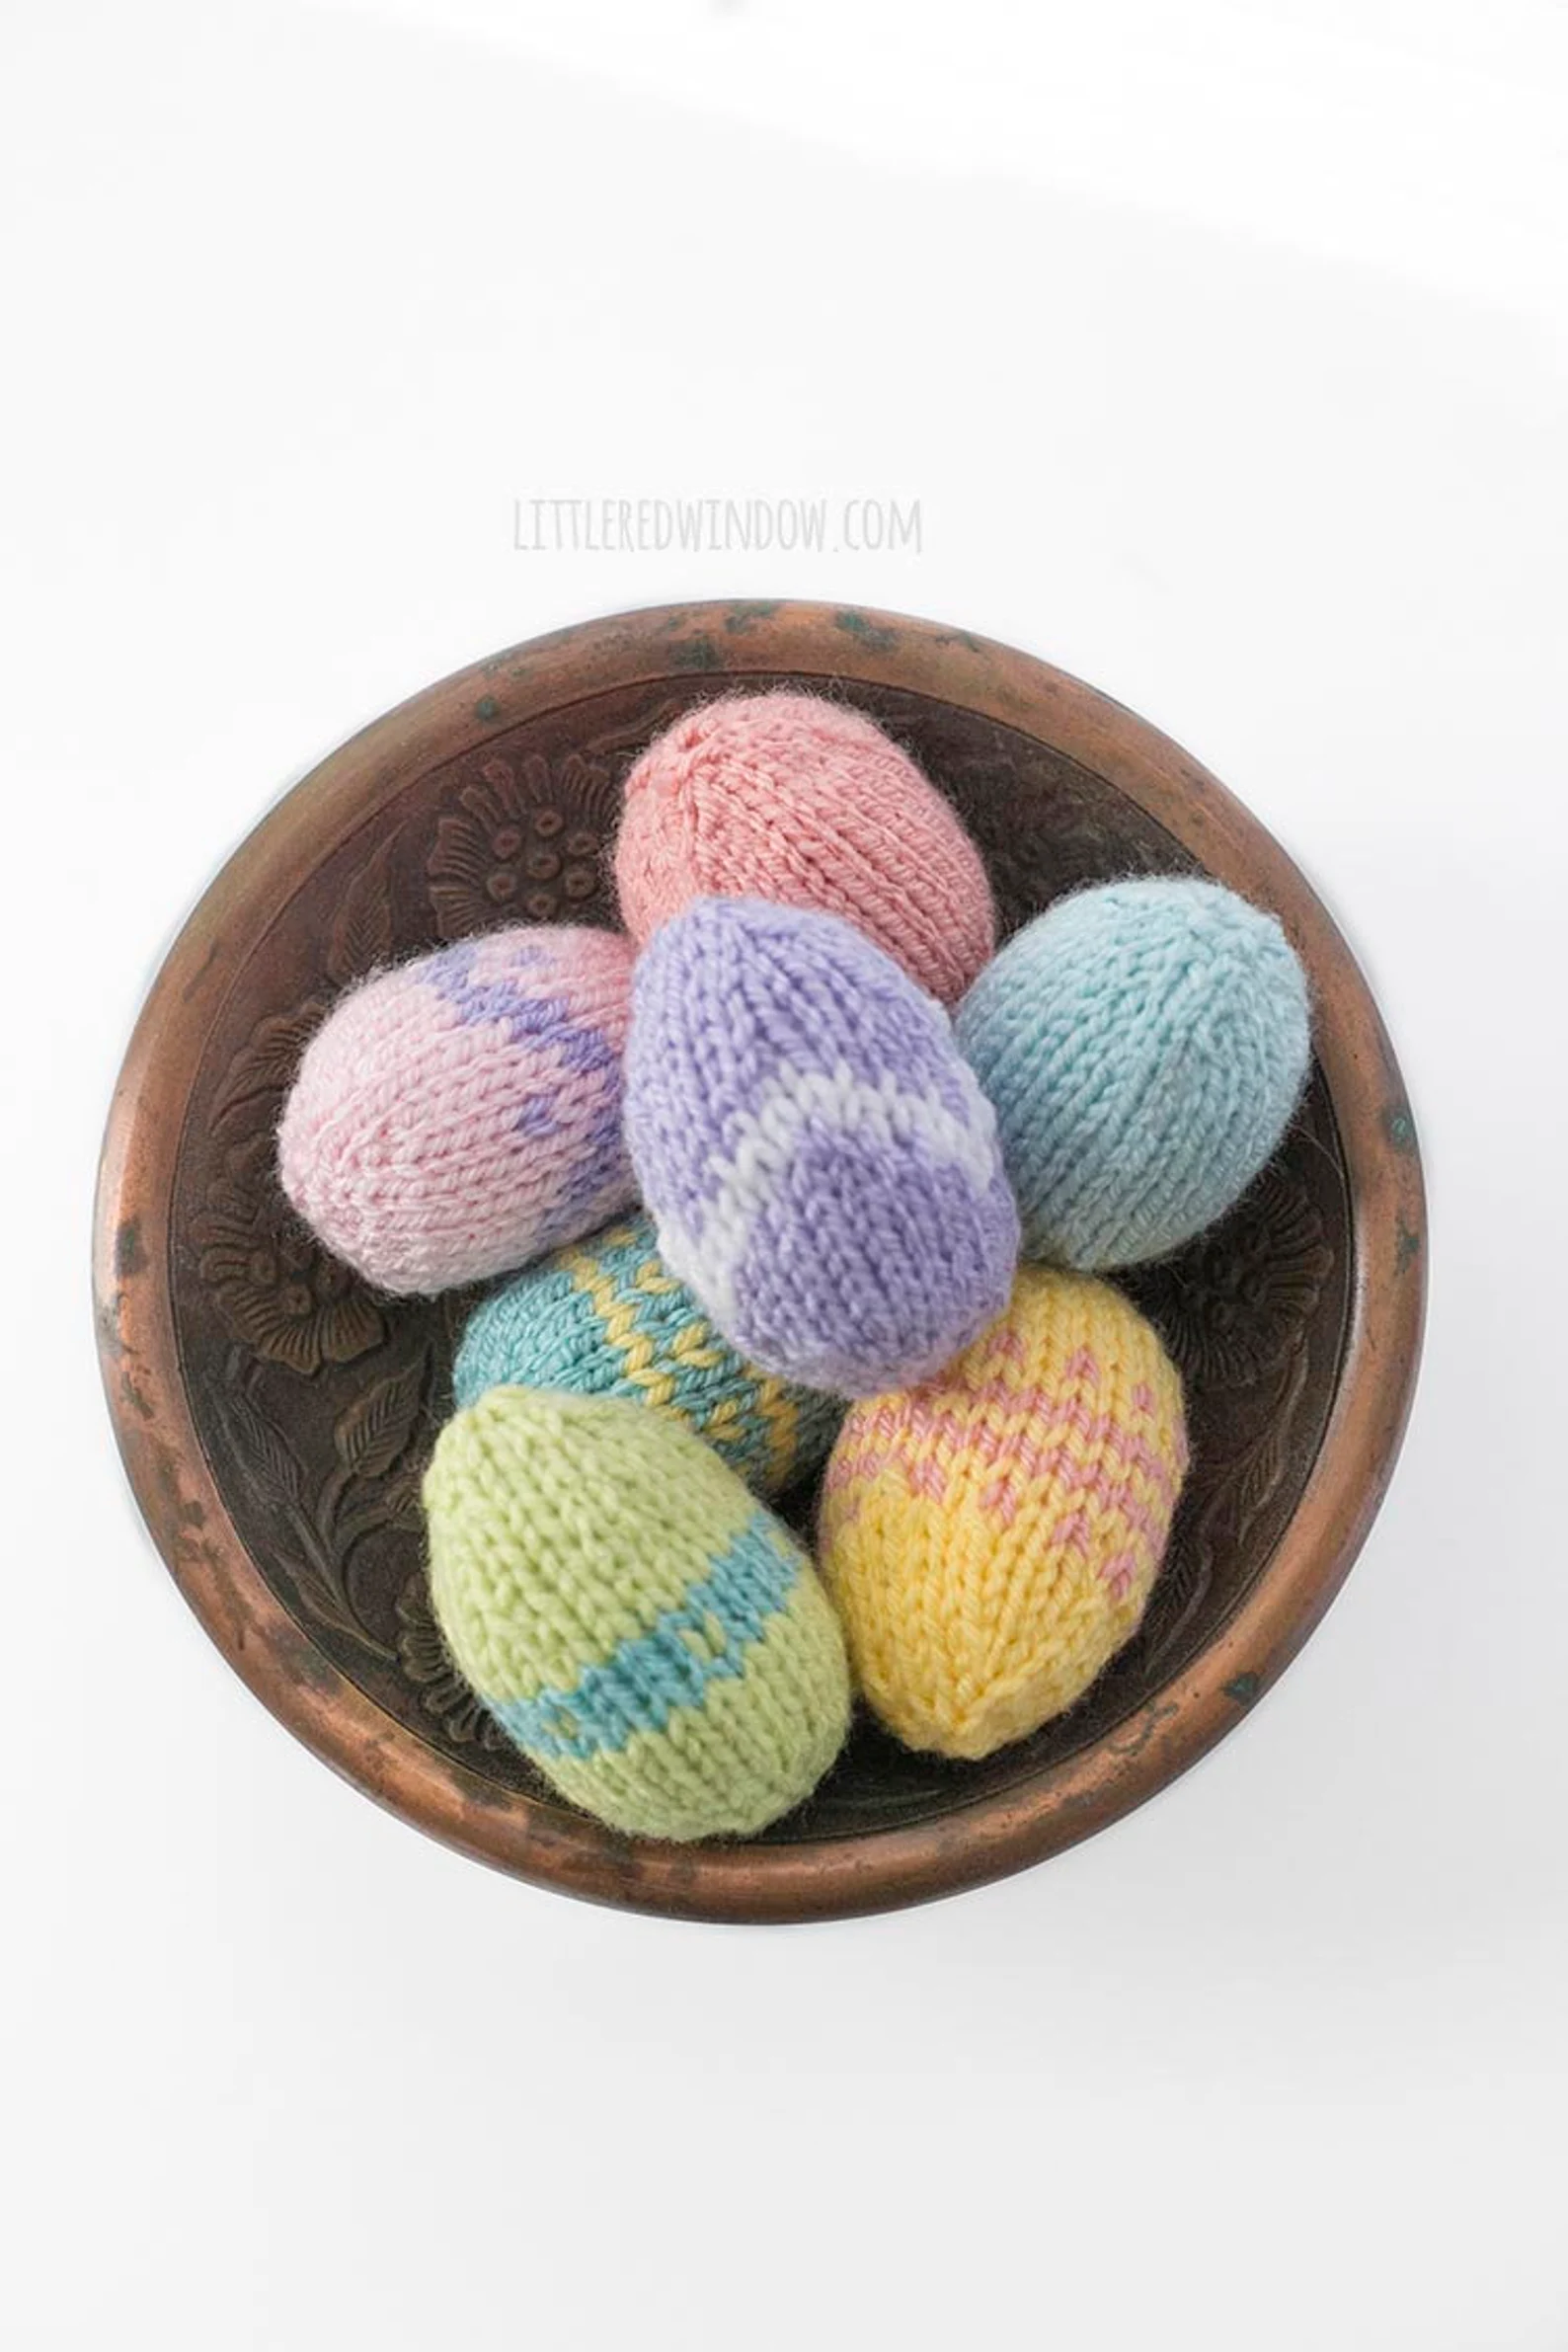 Knitted Easter Egg Pattern by Little Red Window